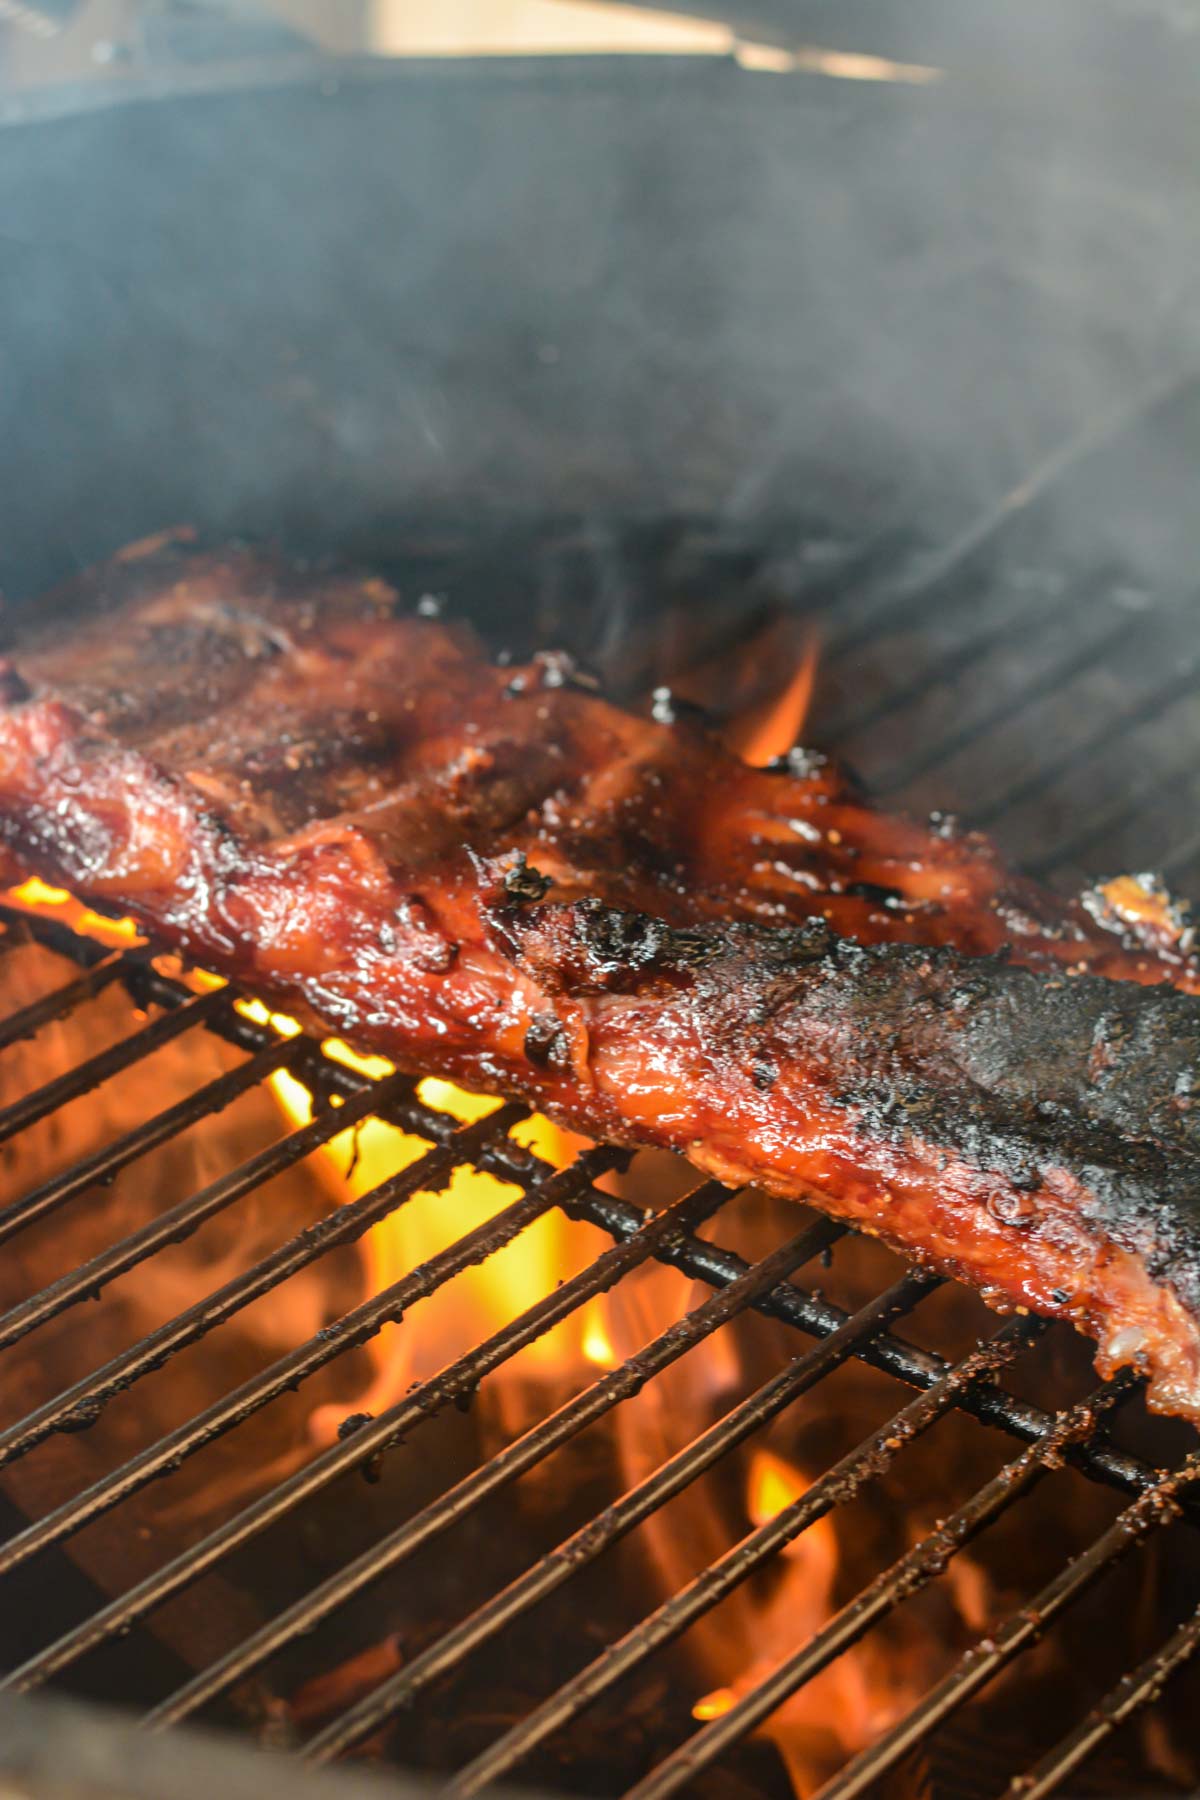 searing the grilled st louis ribs after it is removed from the foil wrap with flames kissing the slab.